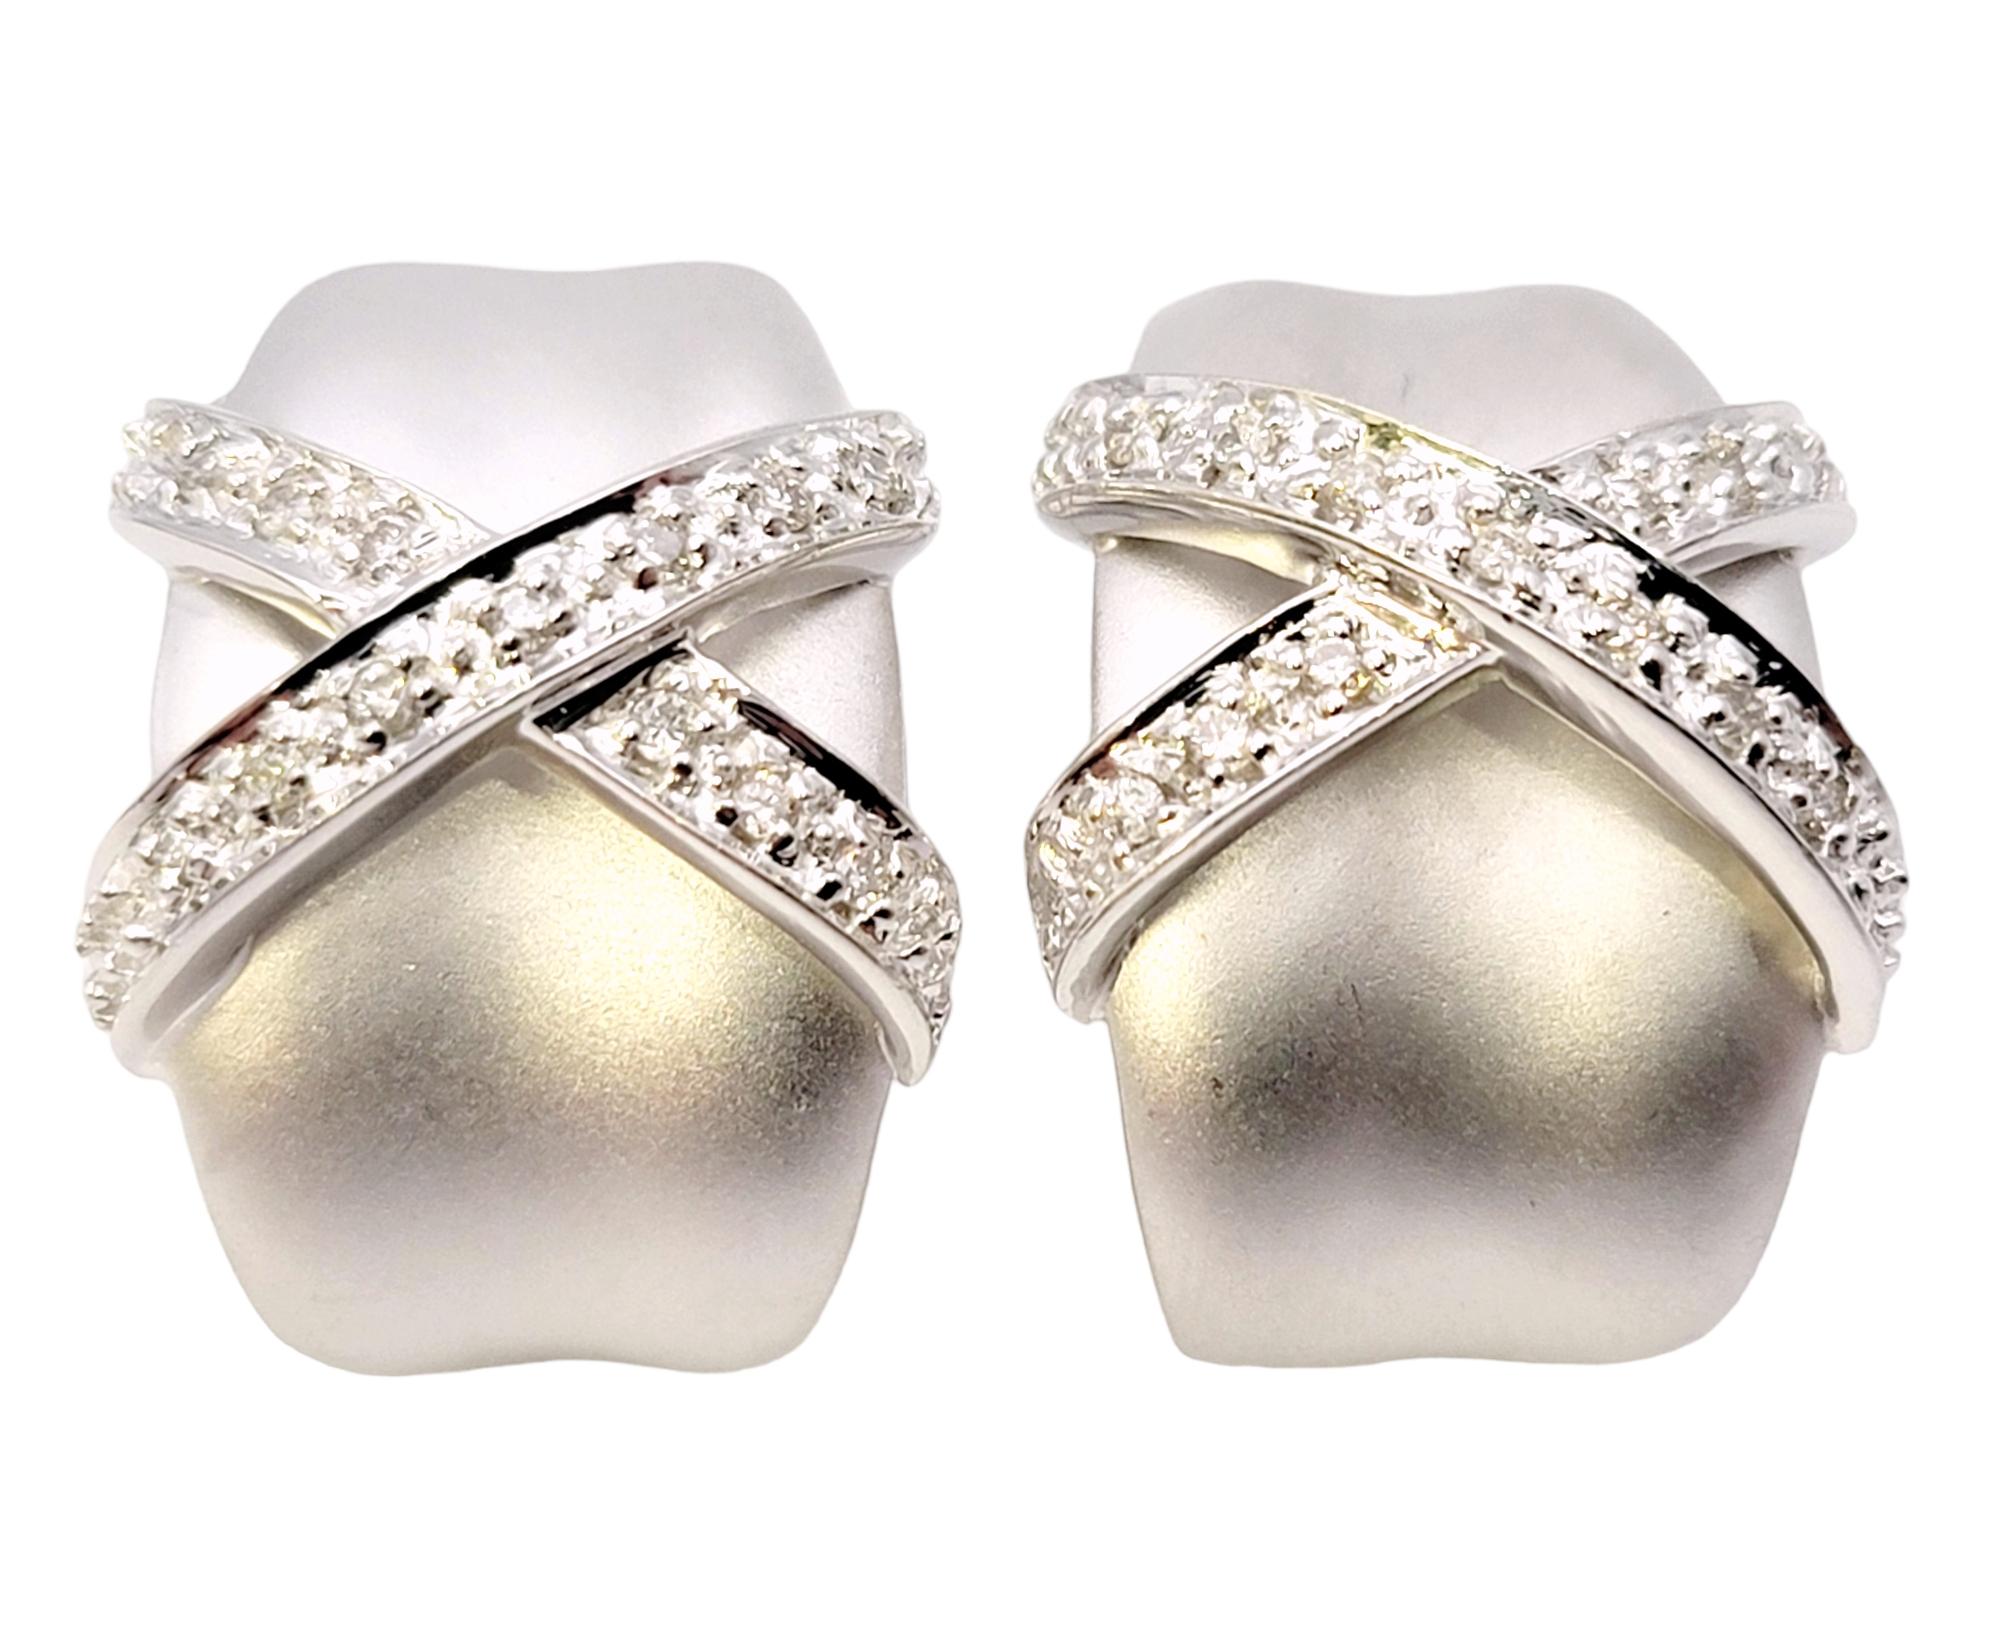 Sleek and modern half hoop earrings with dazzling diamond detailing. The pretty pair gently hugs the lobe while giving off a chic, sophisticated look that you will absolutely love. 

These gorgeous earrings feature a smooth, slightly contoured half